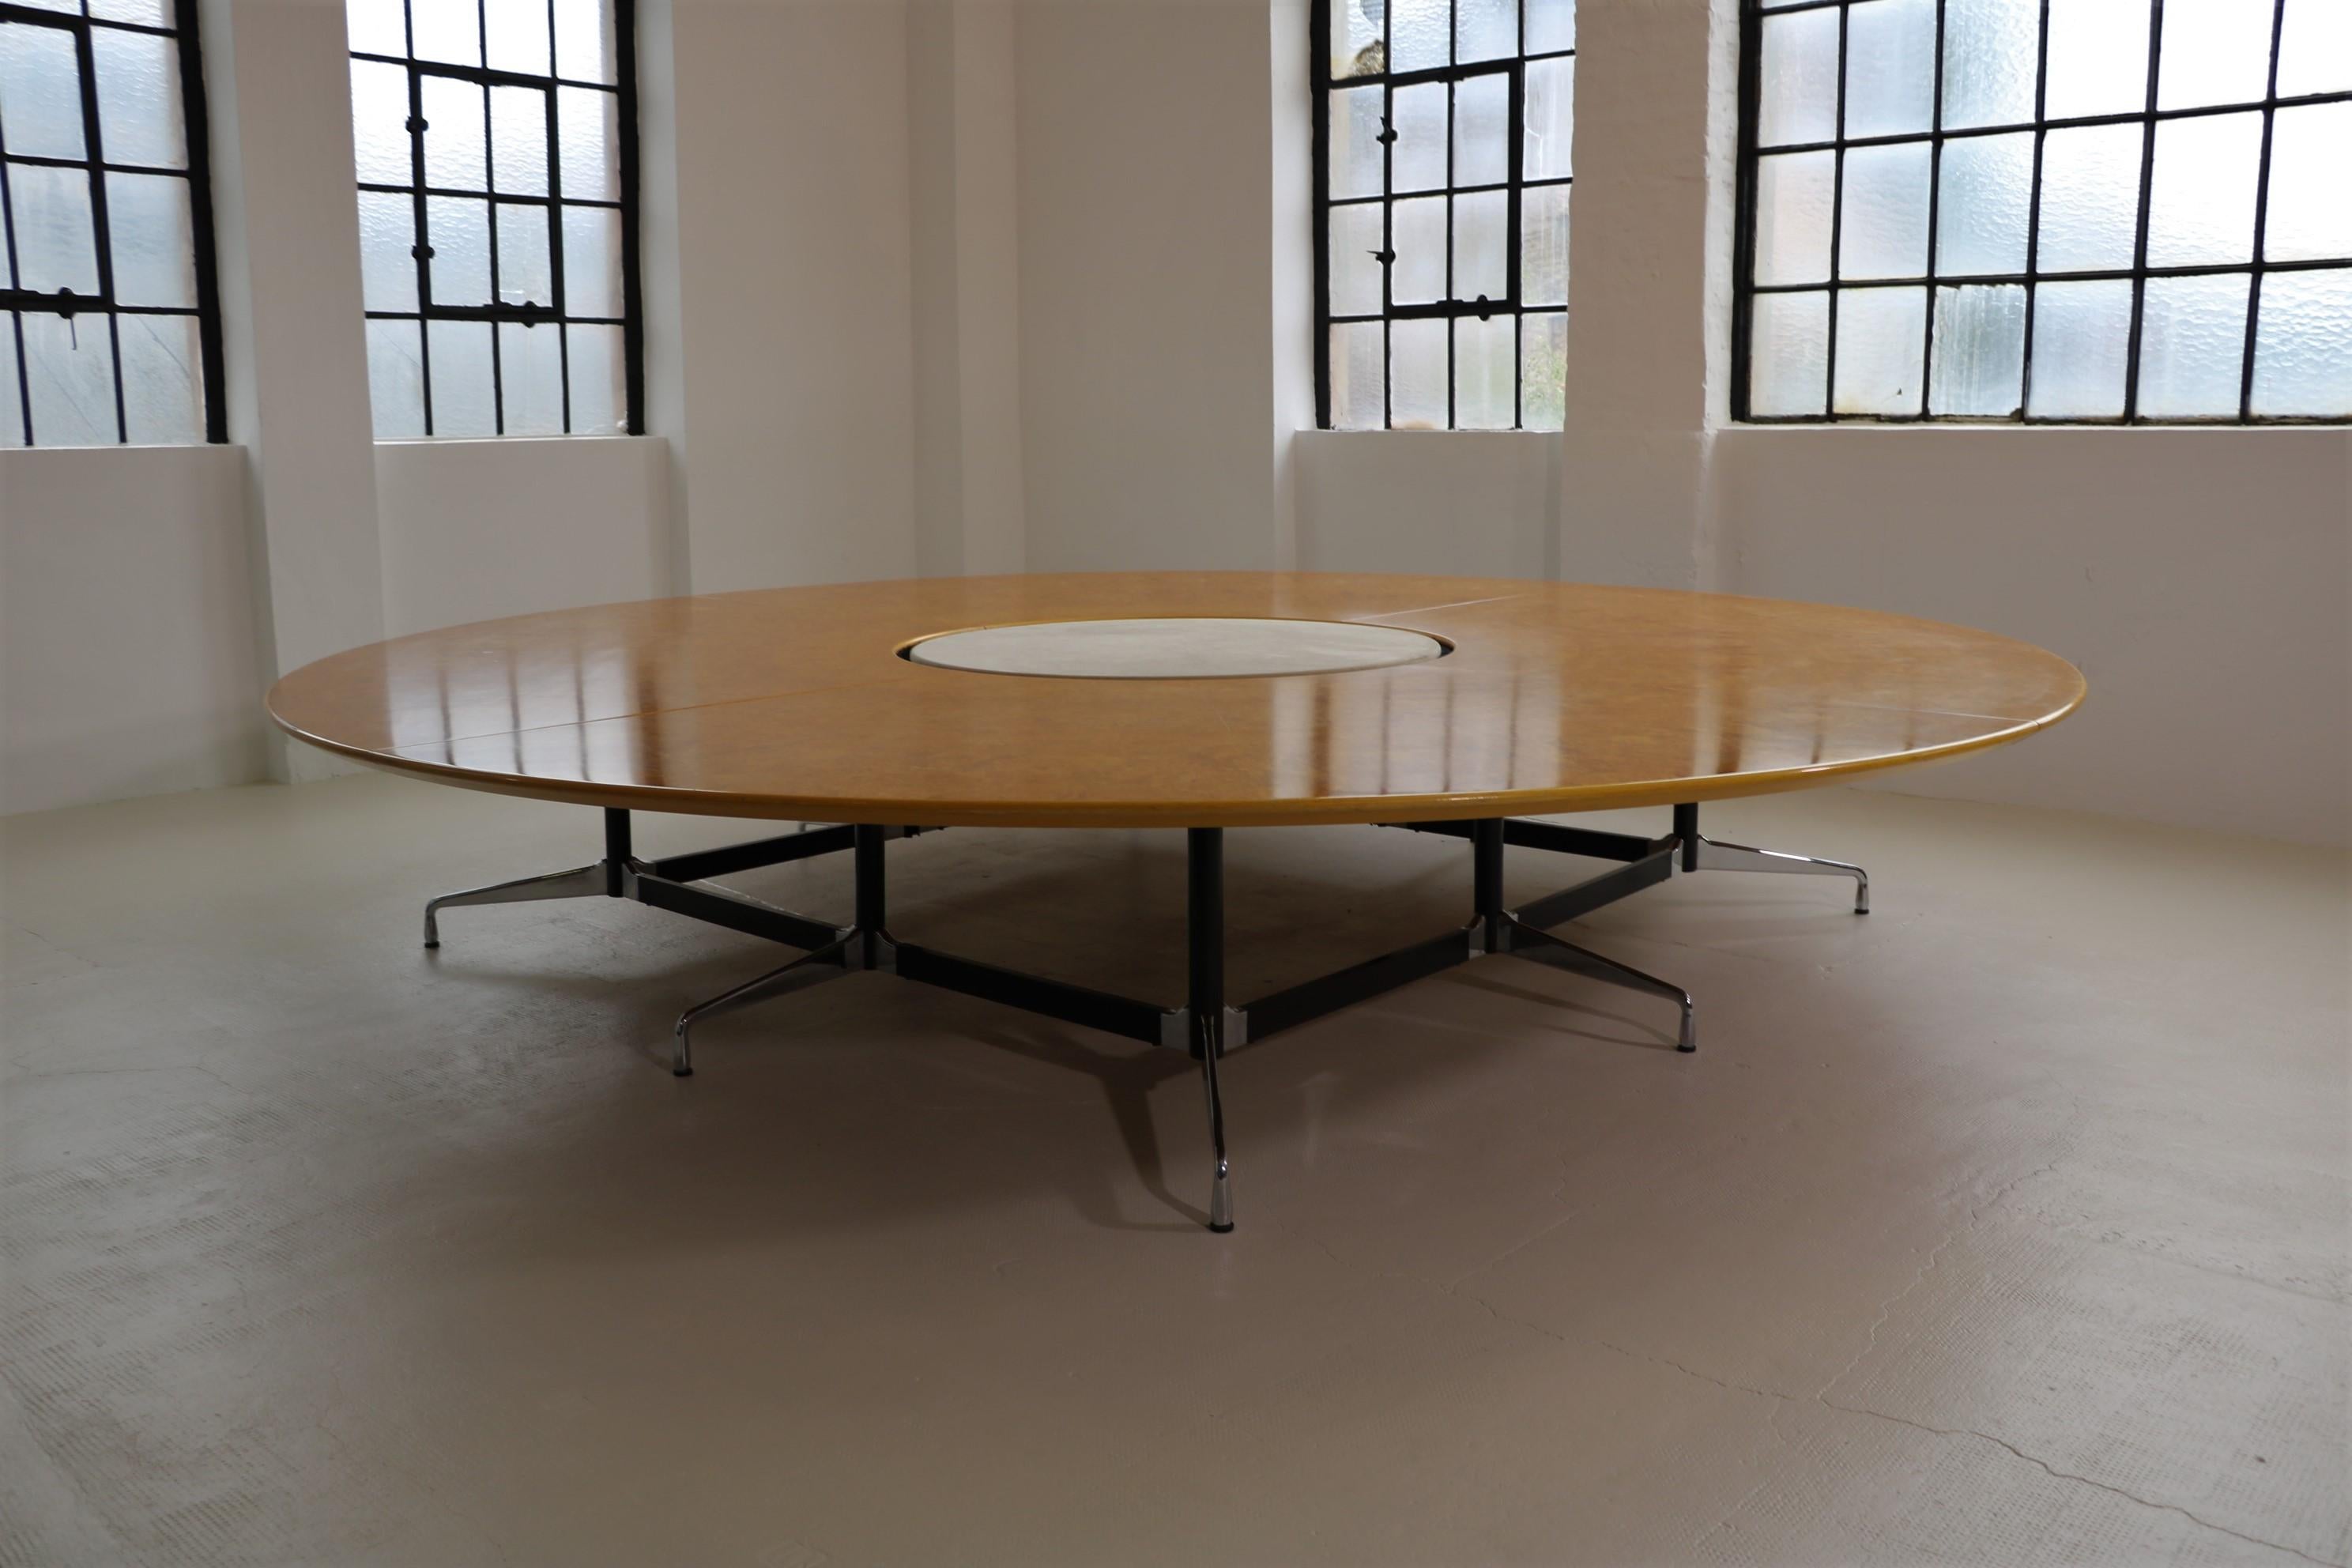 German Vitra/Herman Miller Conference table Charles Eames Segmented Table round 400 cm For Sale